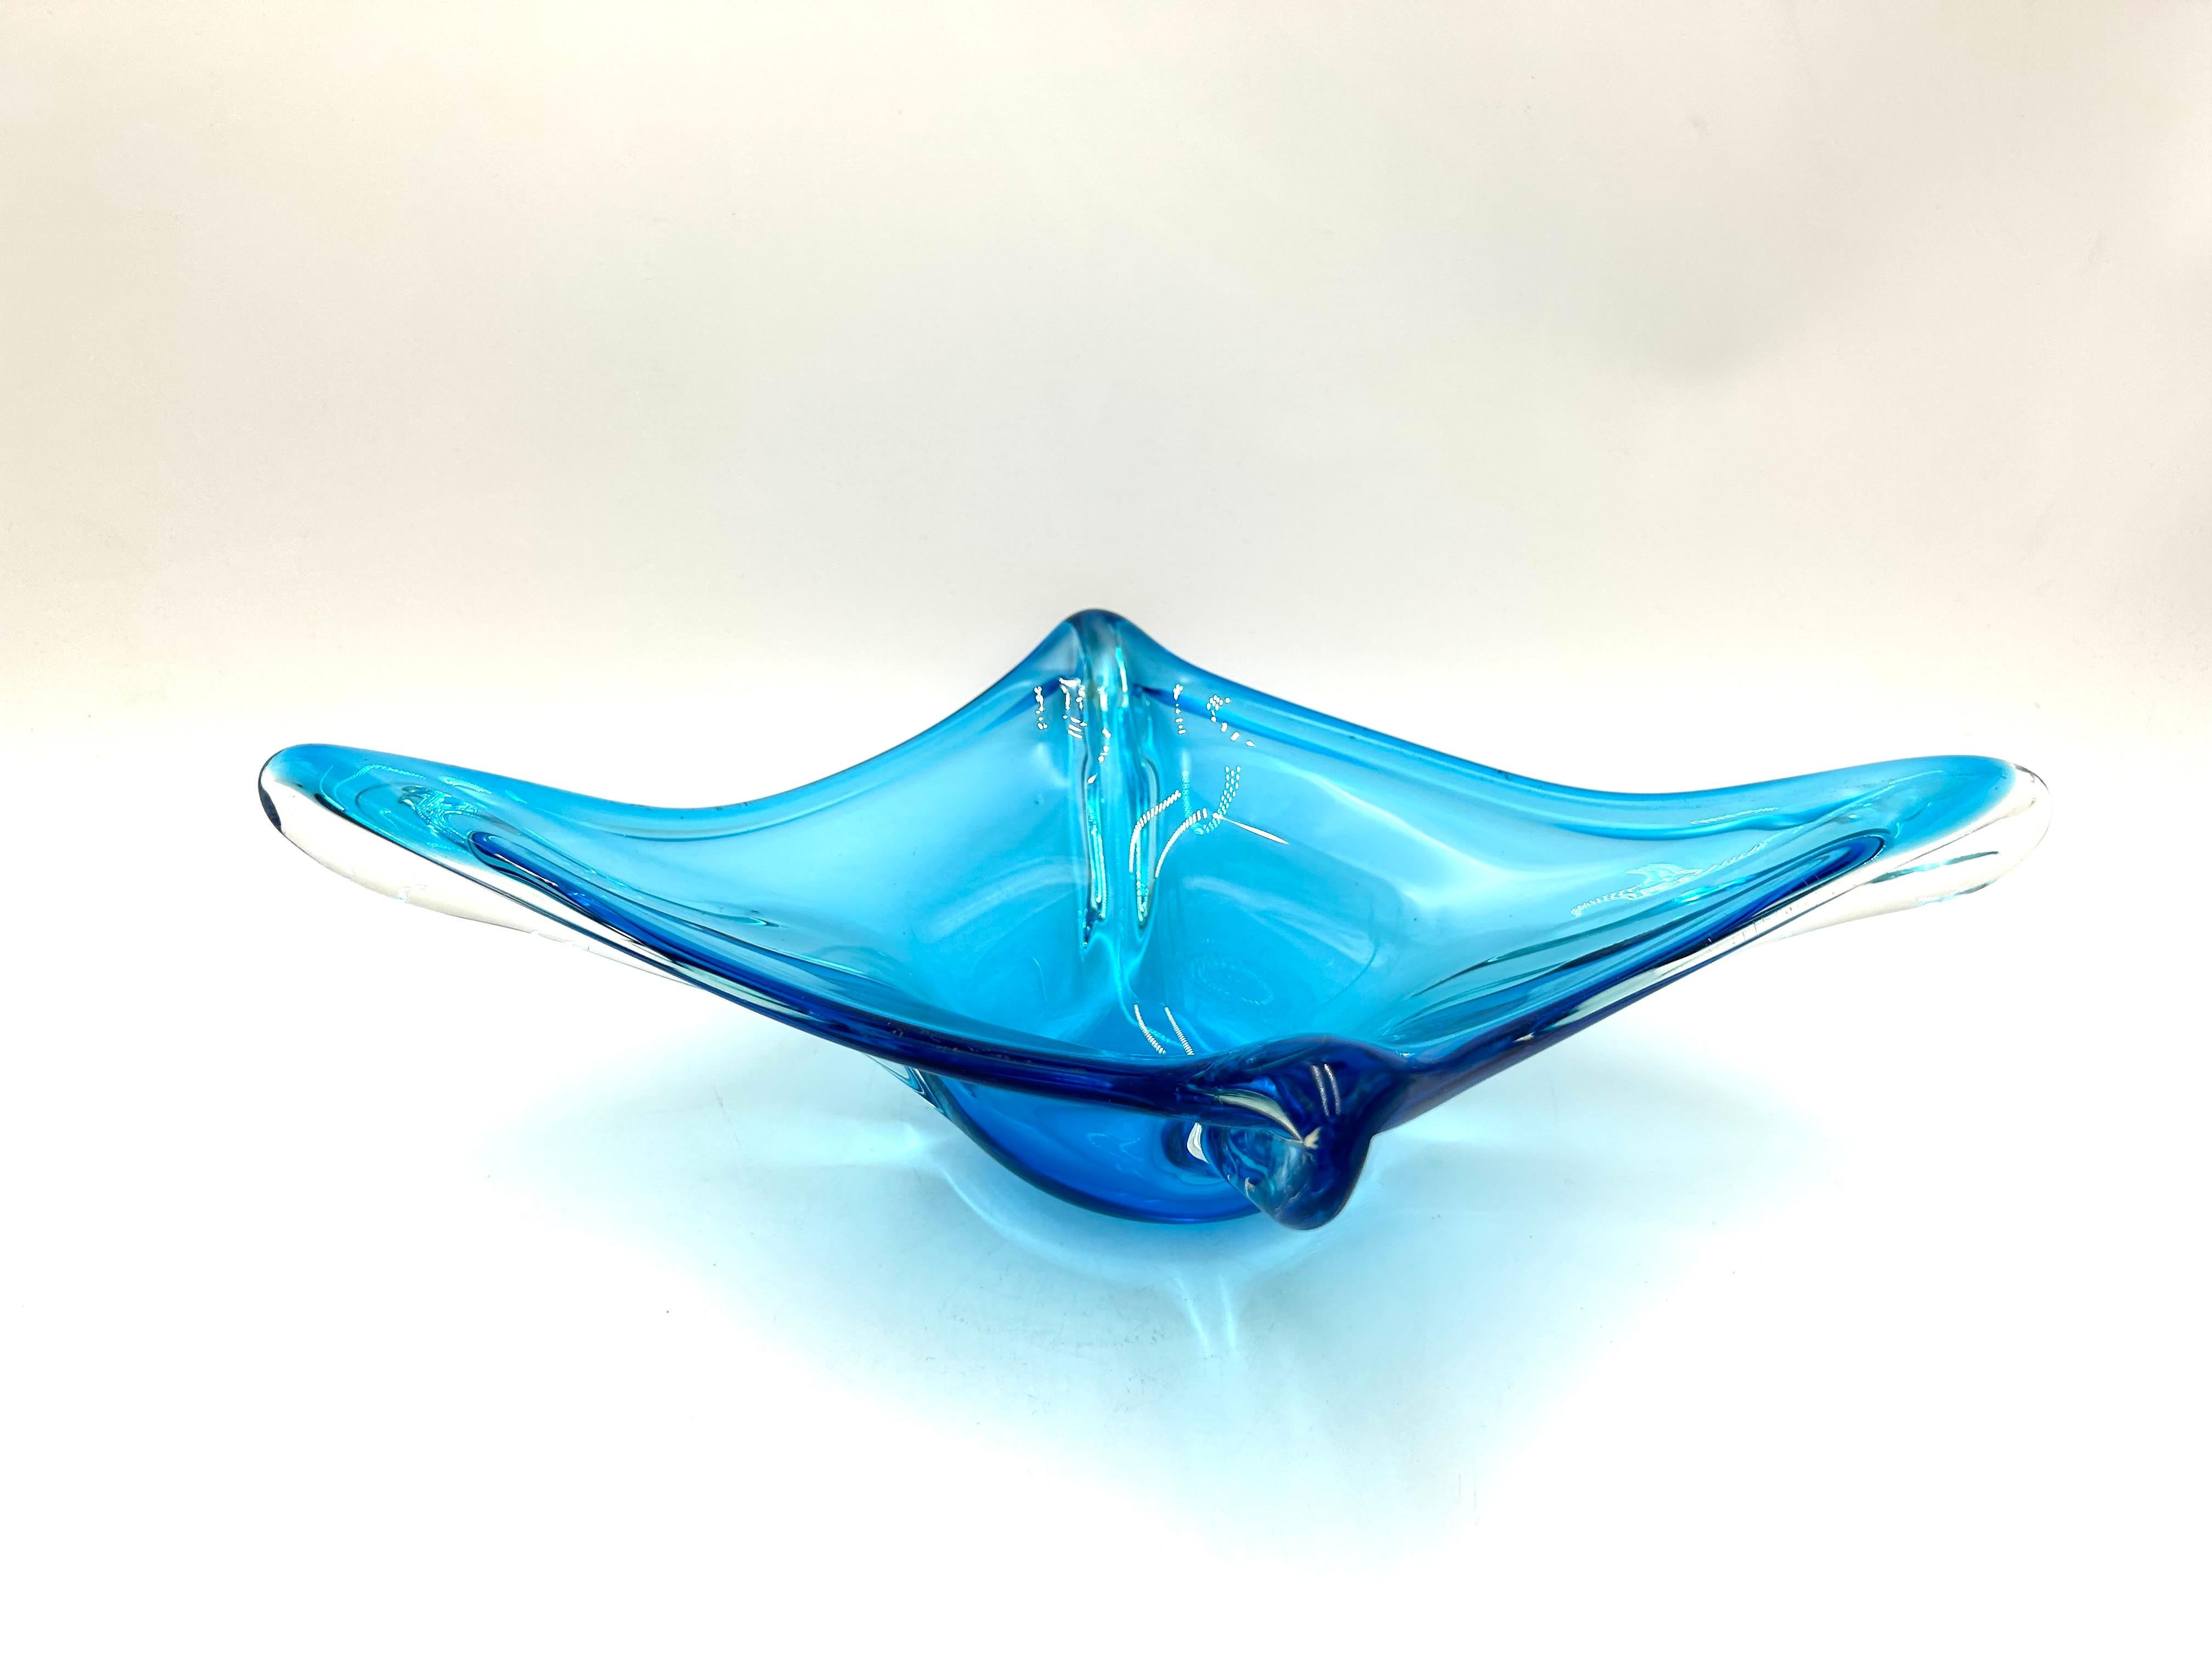 Blue art glass platter

Made in the Czech Republic in the middle of the 20th century

Very good condition, no damage

Height 10cm width 40cm depth 28cm.